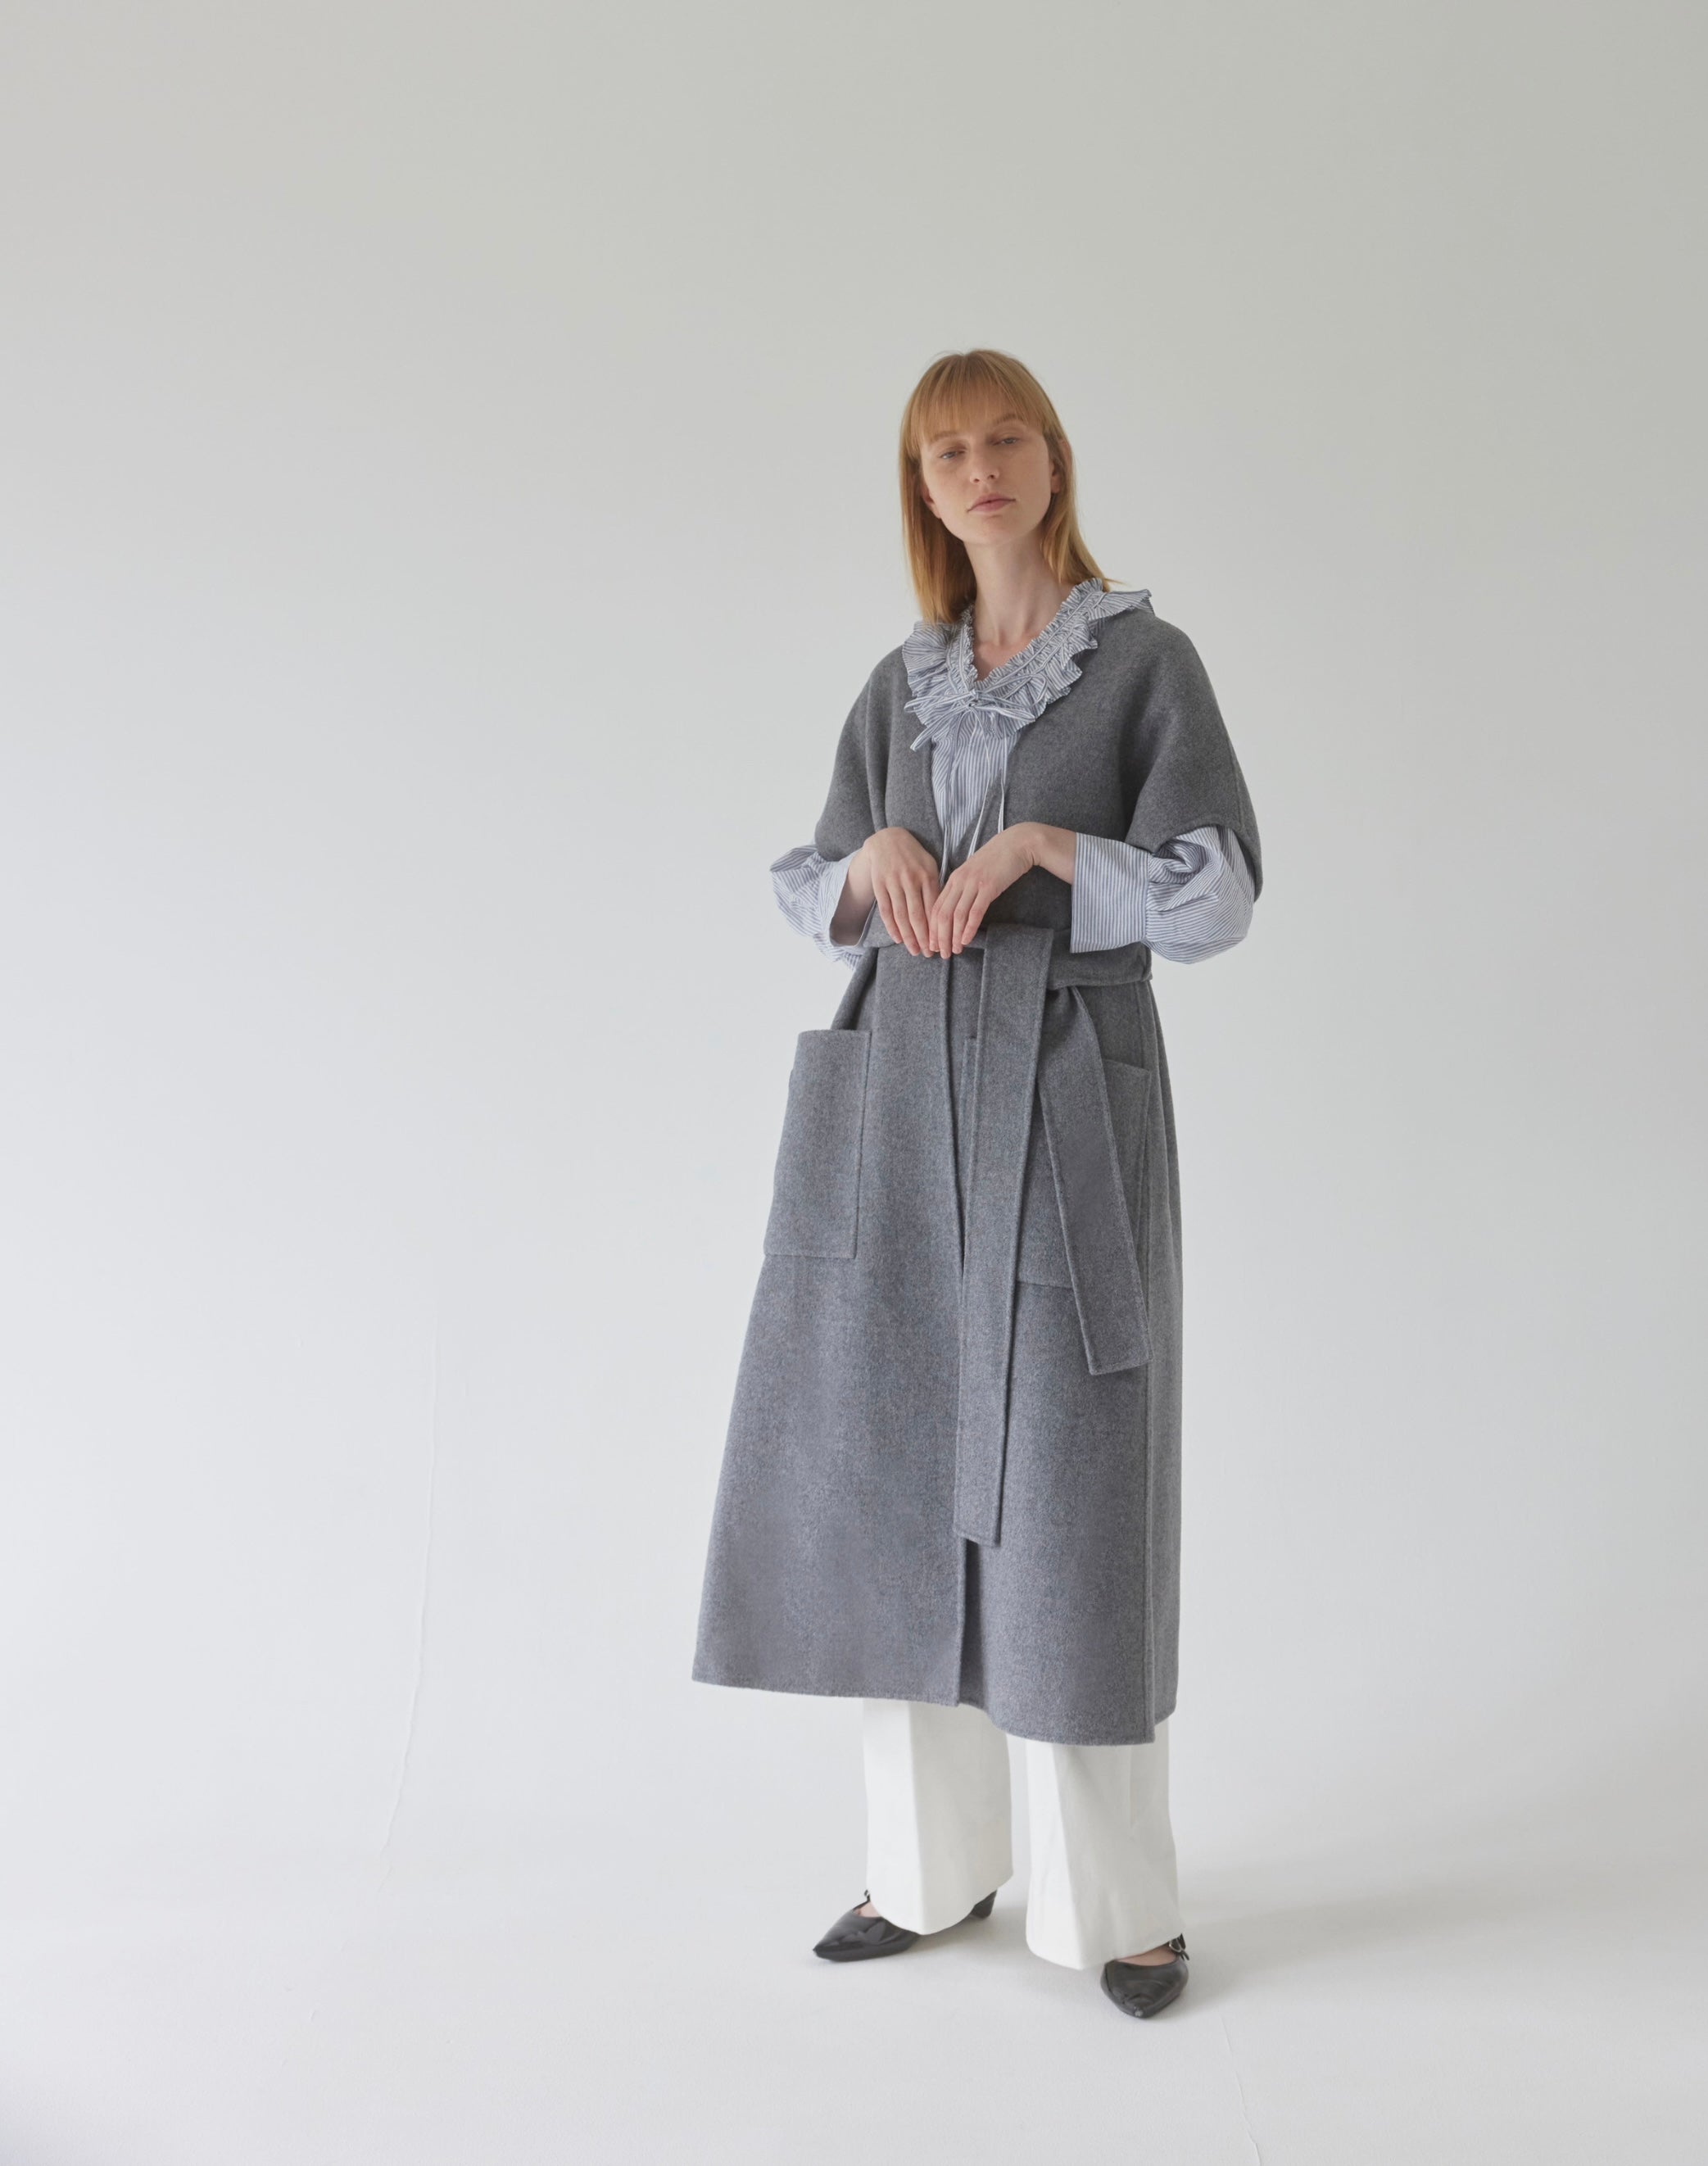 St.cecilia OUTER – GIRLISH